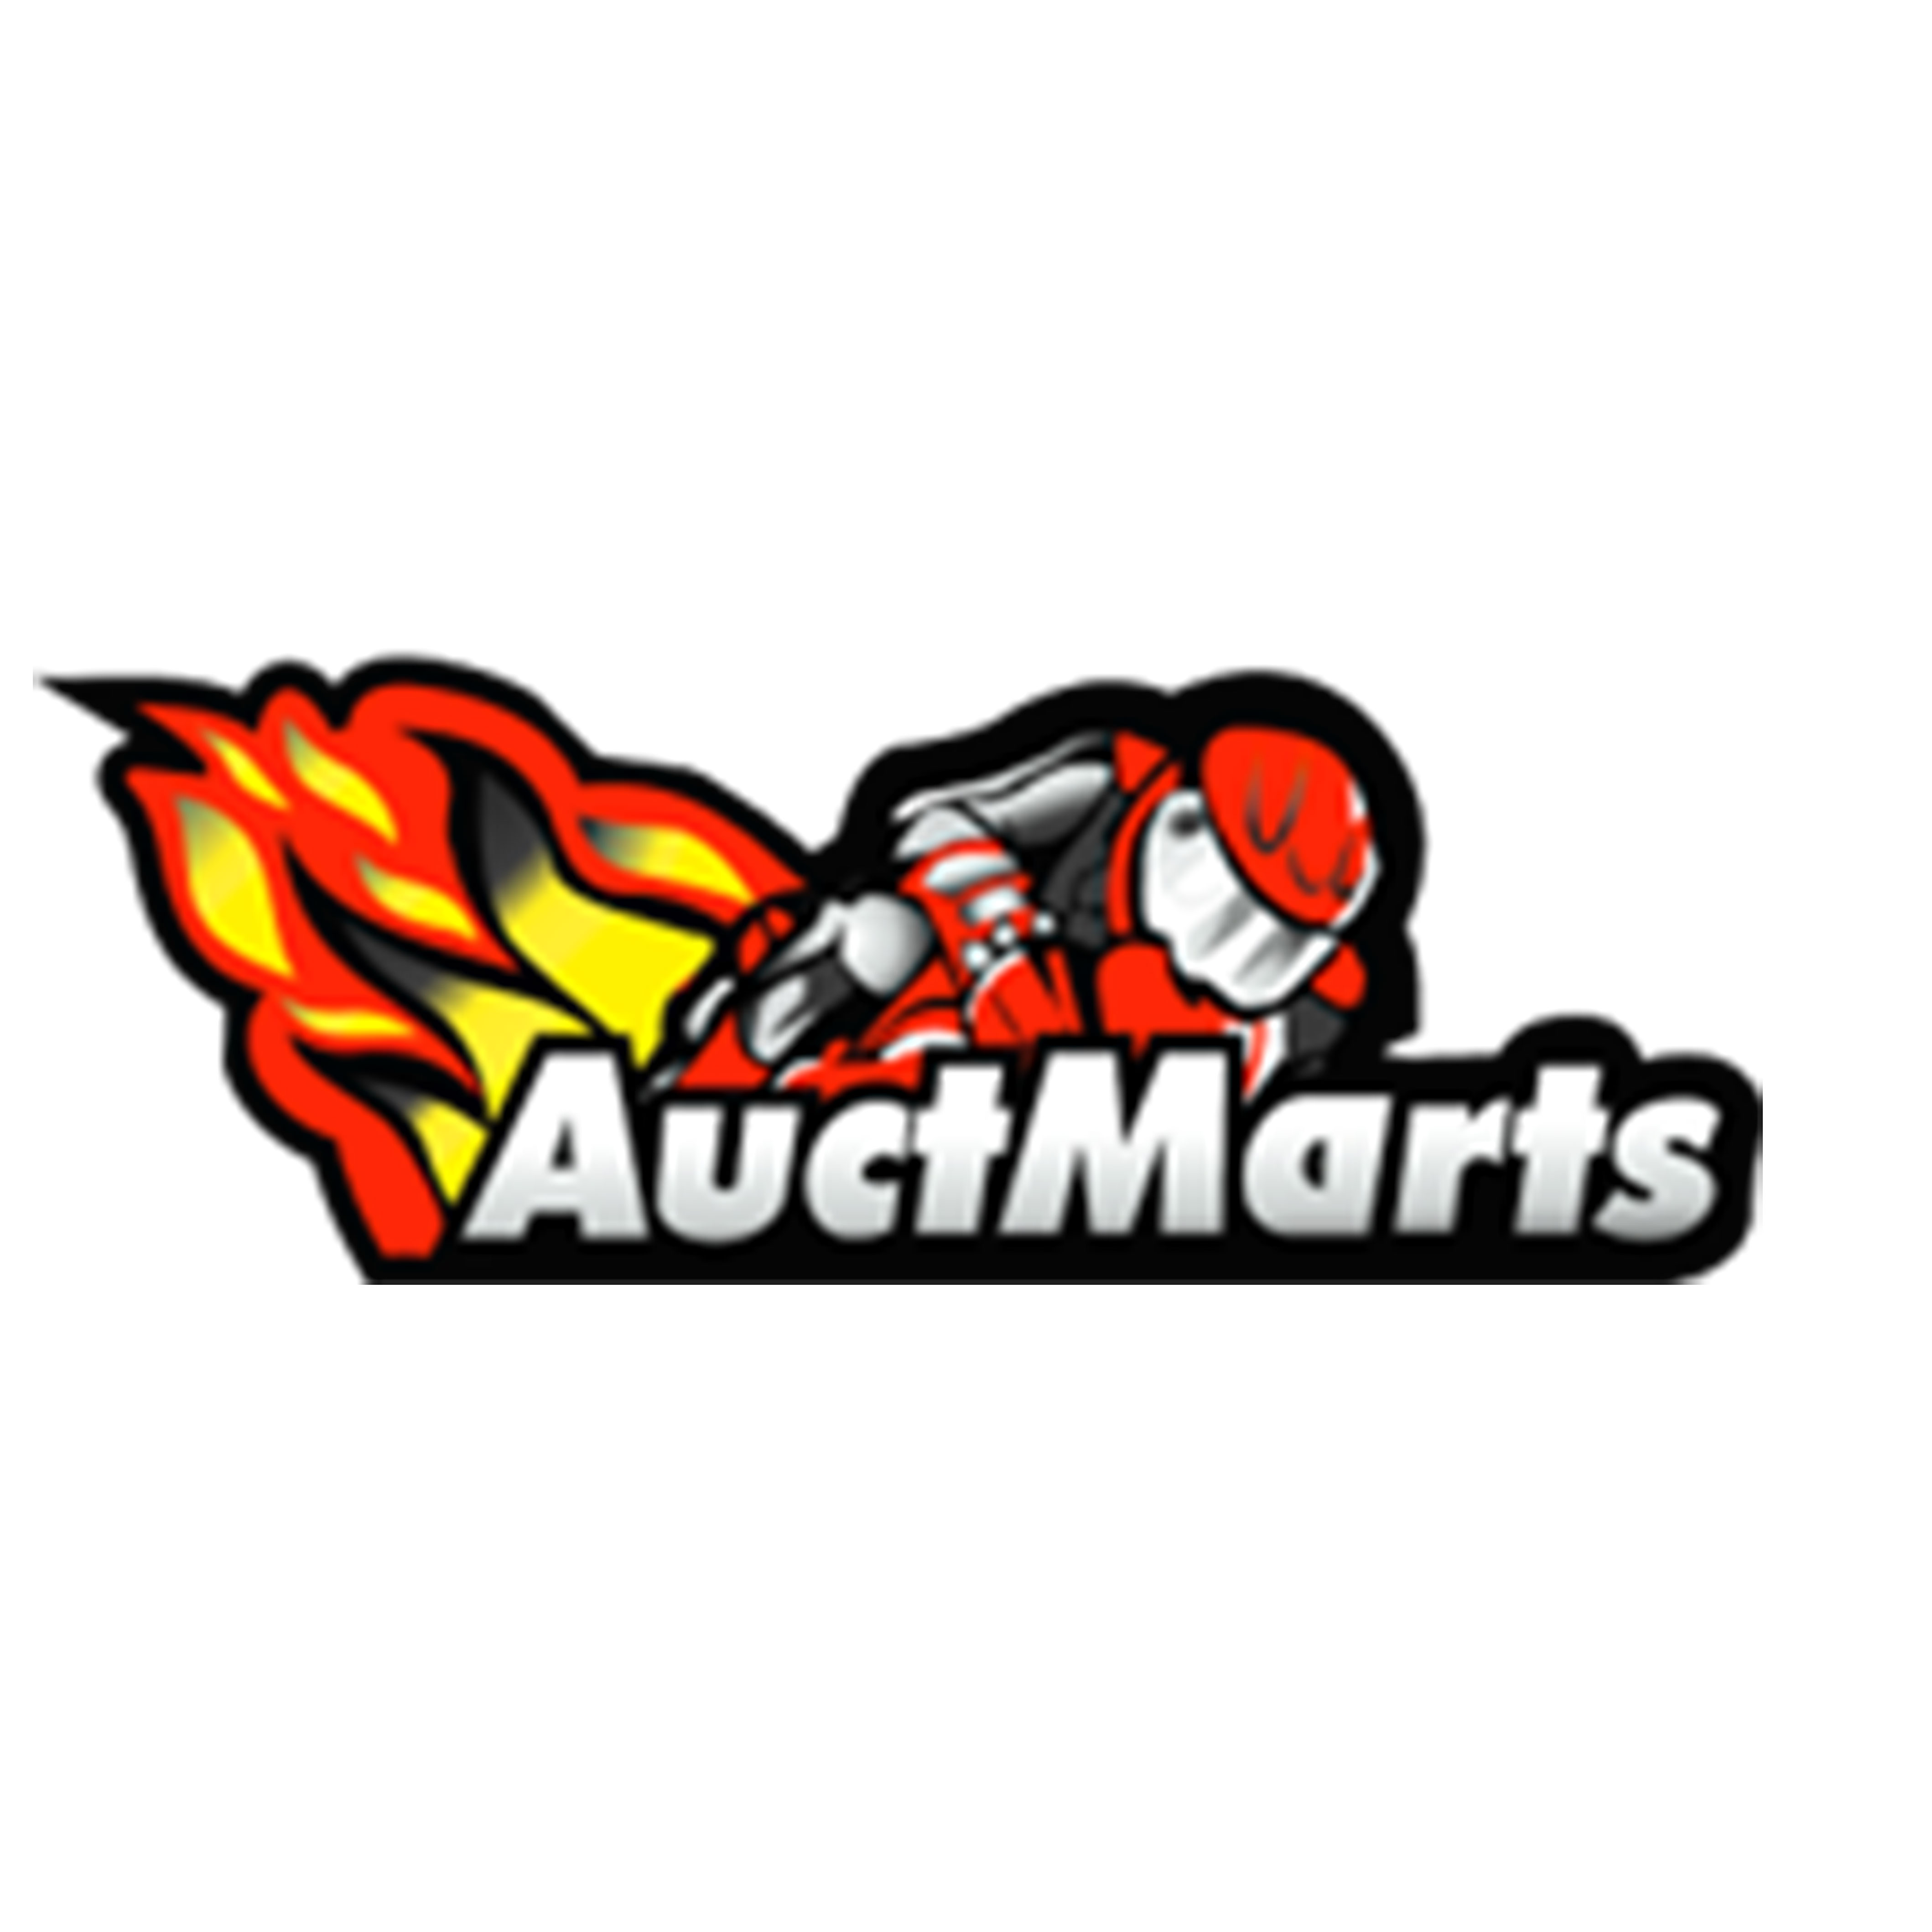 Auctmarts Trading